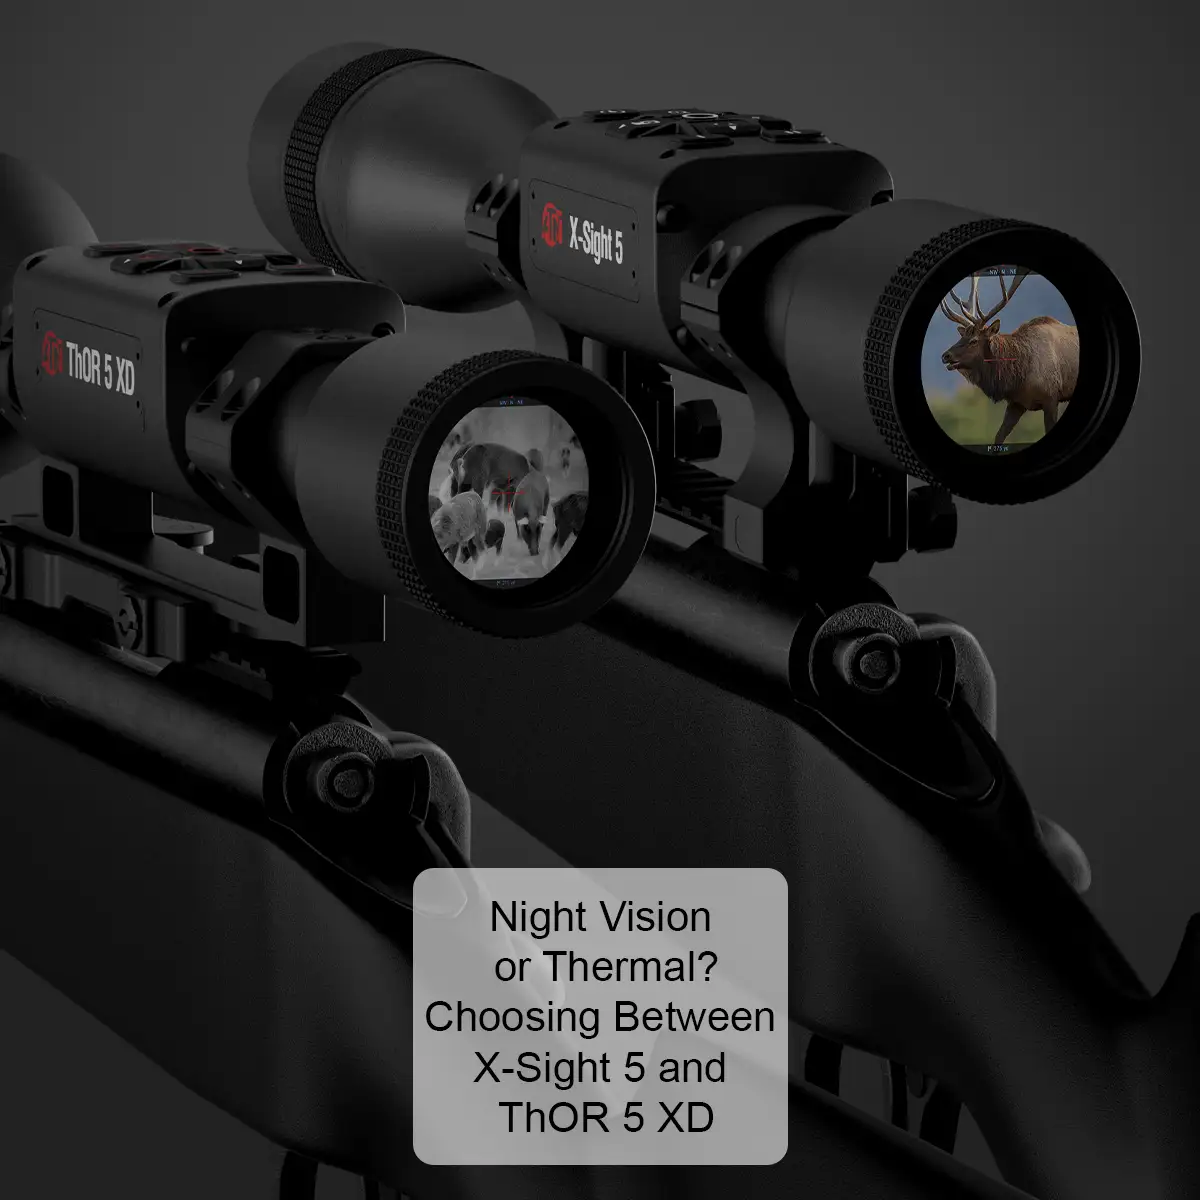 Night Vision or Thermal - Choosing Between X-Sight 5 and ThOR 5 XD